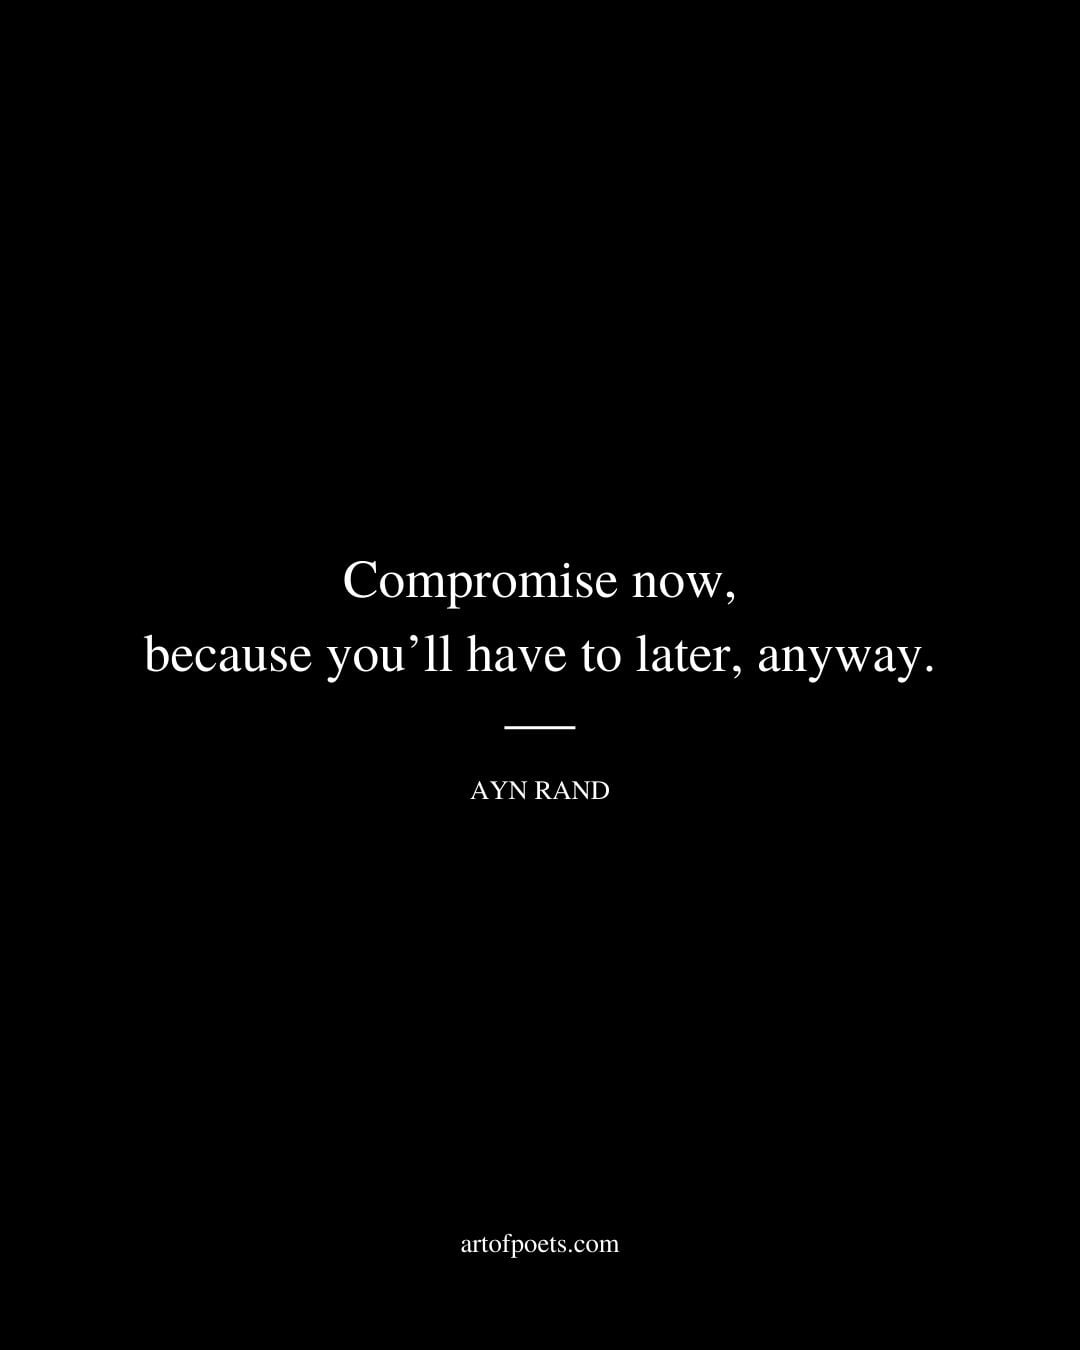 Compromise now because youll have to later anyway